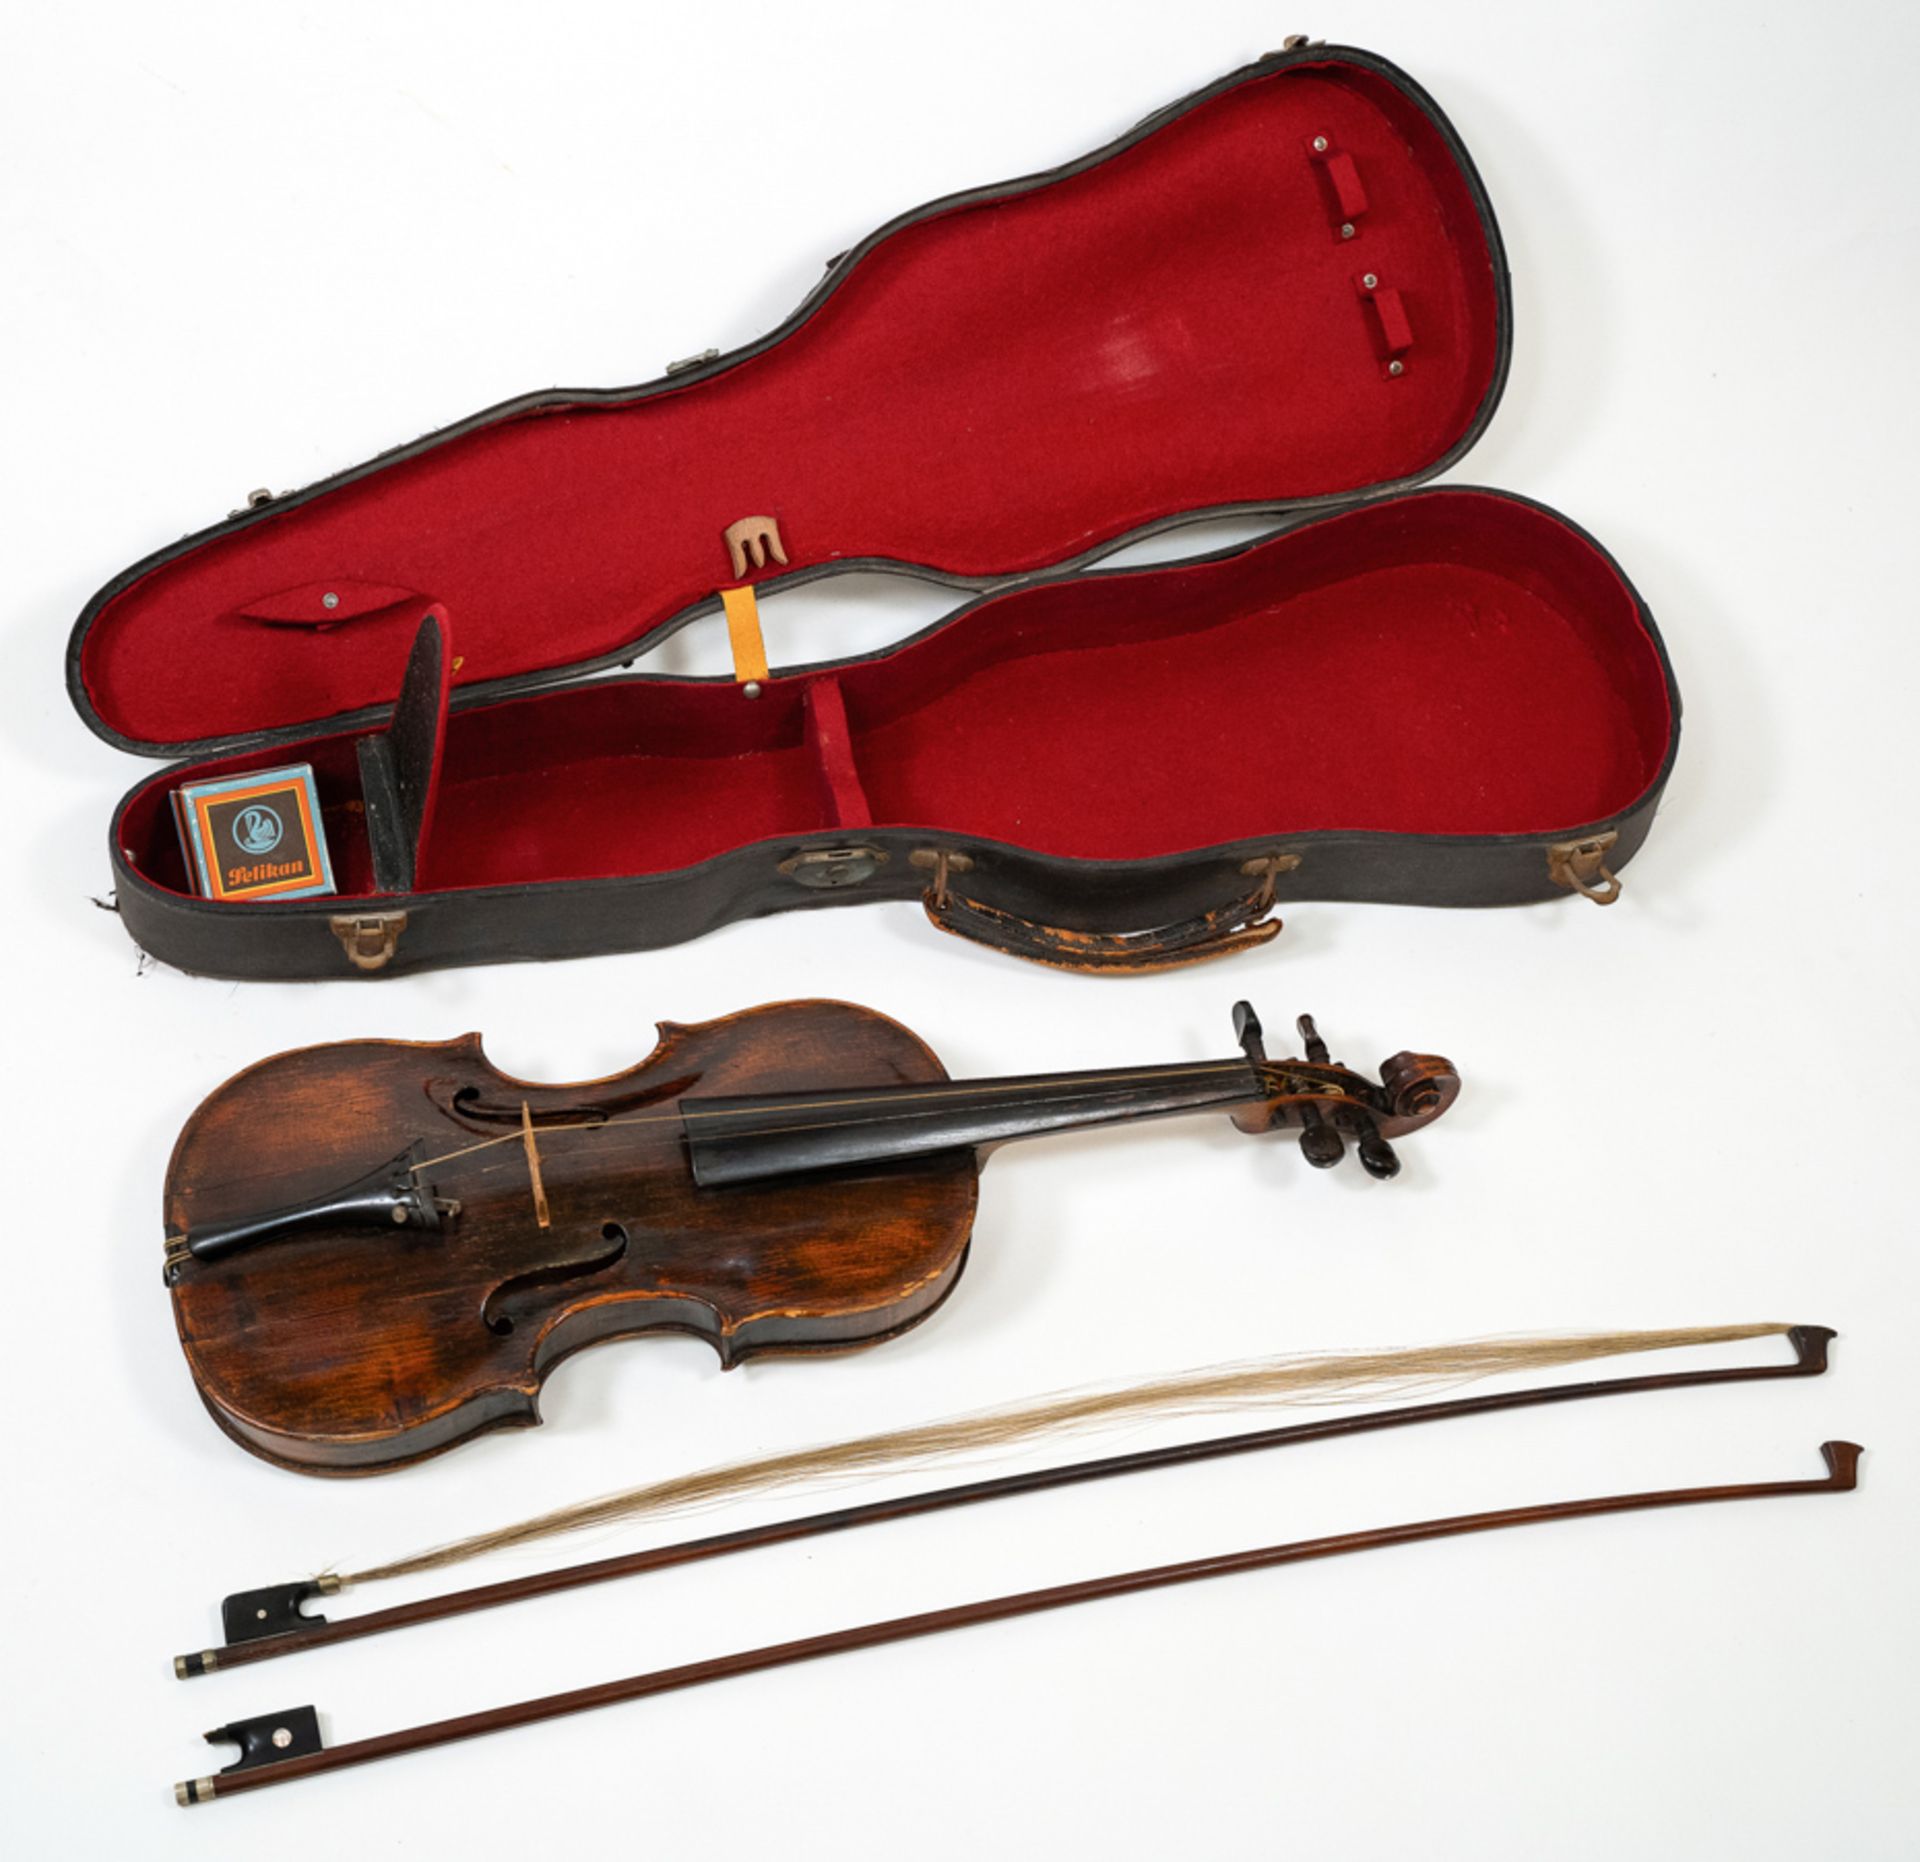 HISTORICAL VIOLIN WITH BOWS AND CASE - REPAIRED JOHANN MAHLKE BERLIN